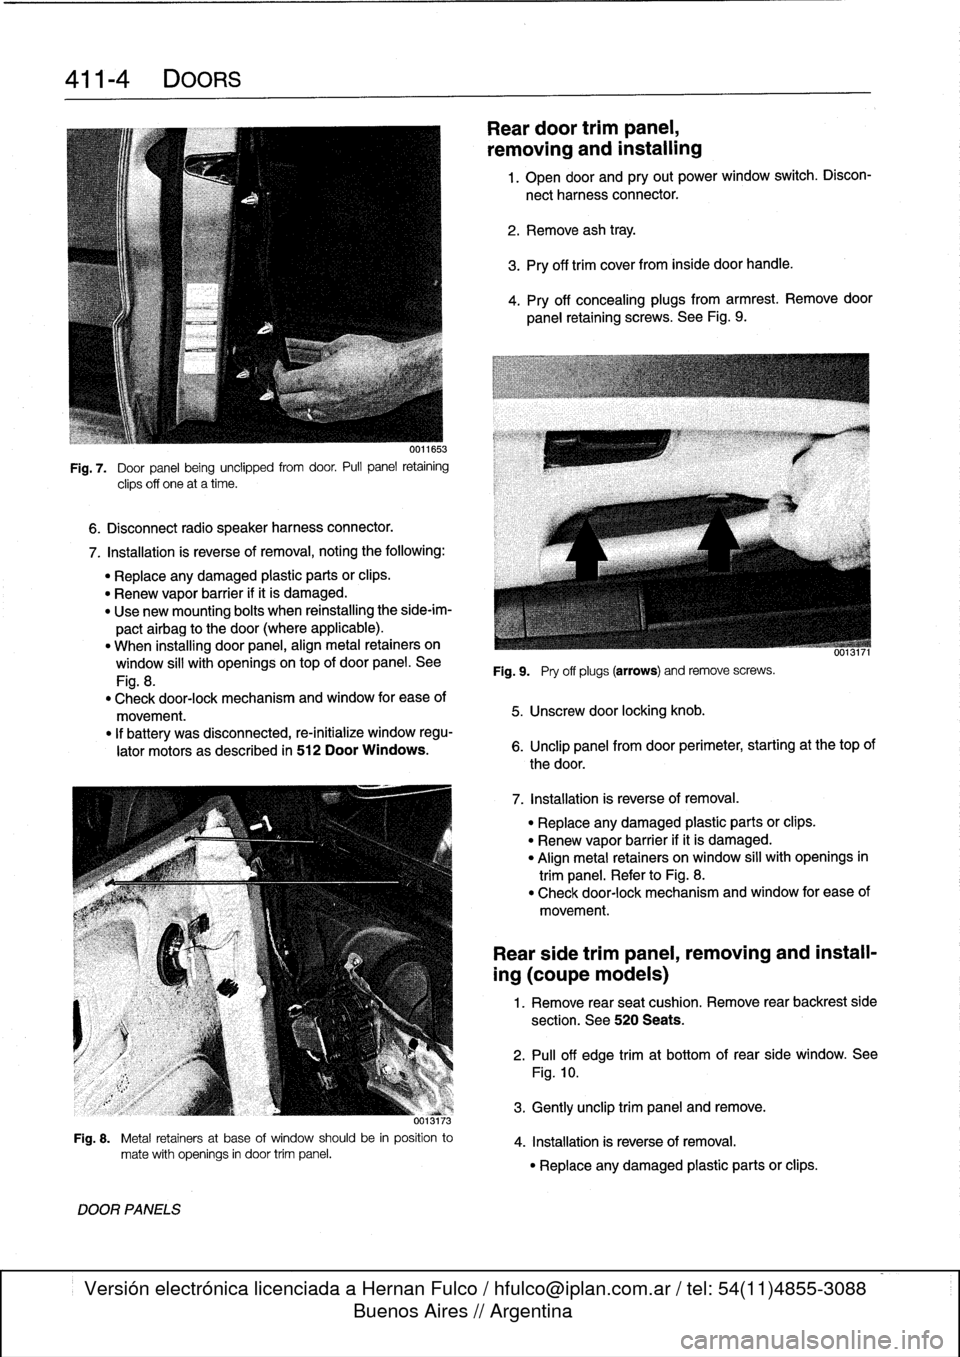 BMW M3 1993 E36 Workshop Manual 
411-
4
DOORS

6
.
Disconnect
radio
speaker
harness
connector
.

Fig
.
7
.

	

Door
panel
being
unclipped
from
door
.
Pull
panel
retaining

clips
off
one
at
a
time
.

7
.
Installation
is
reverse
of
re